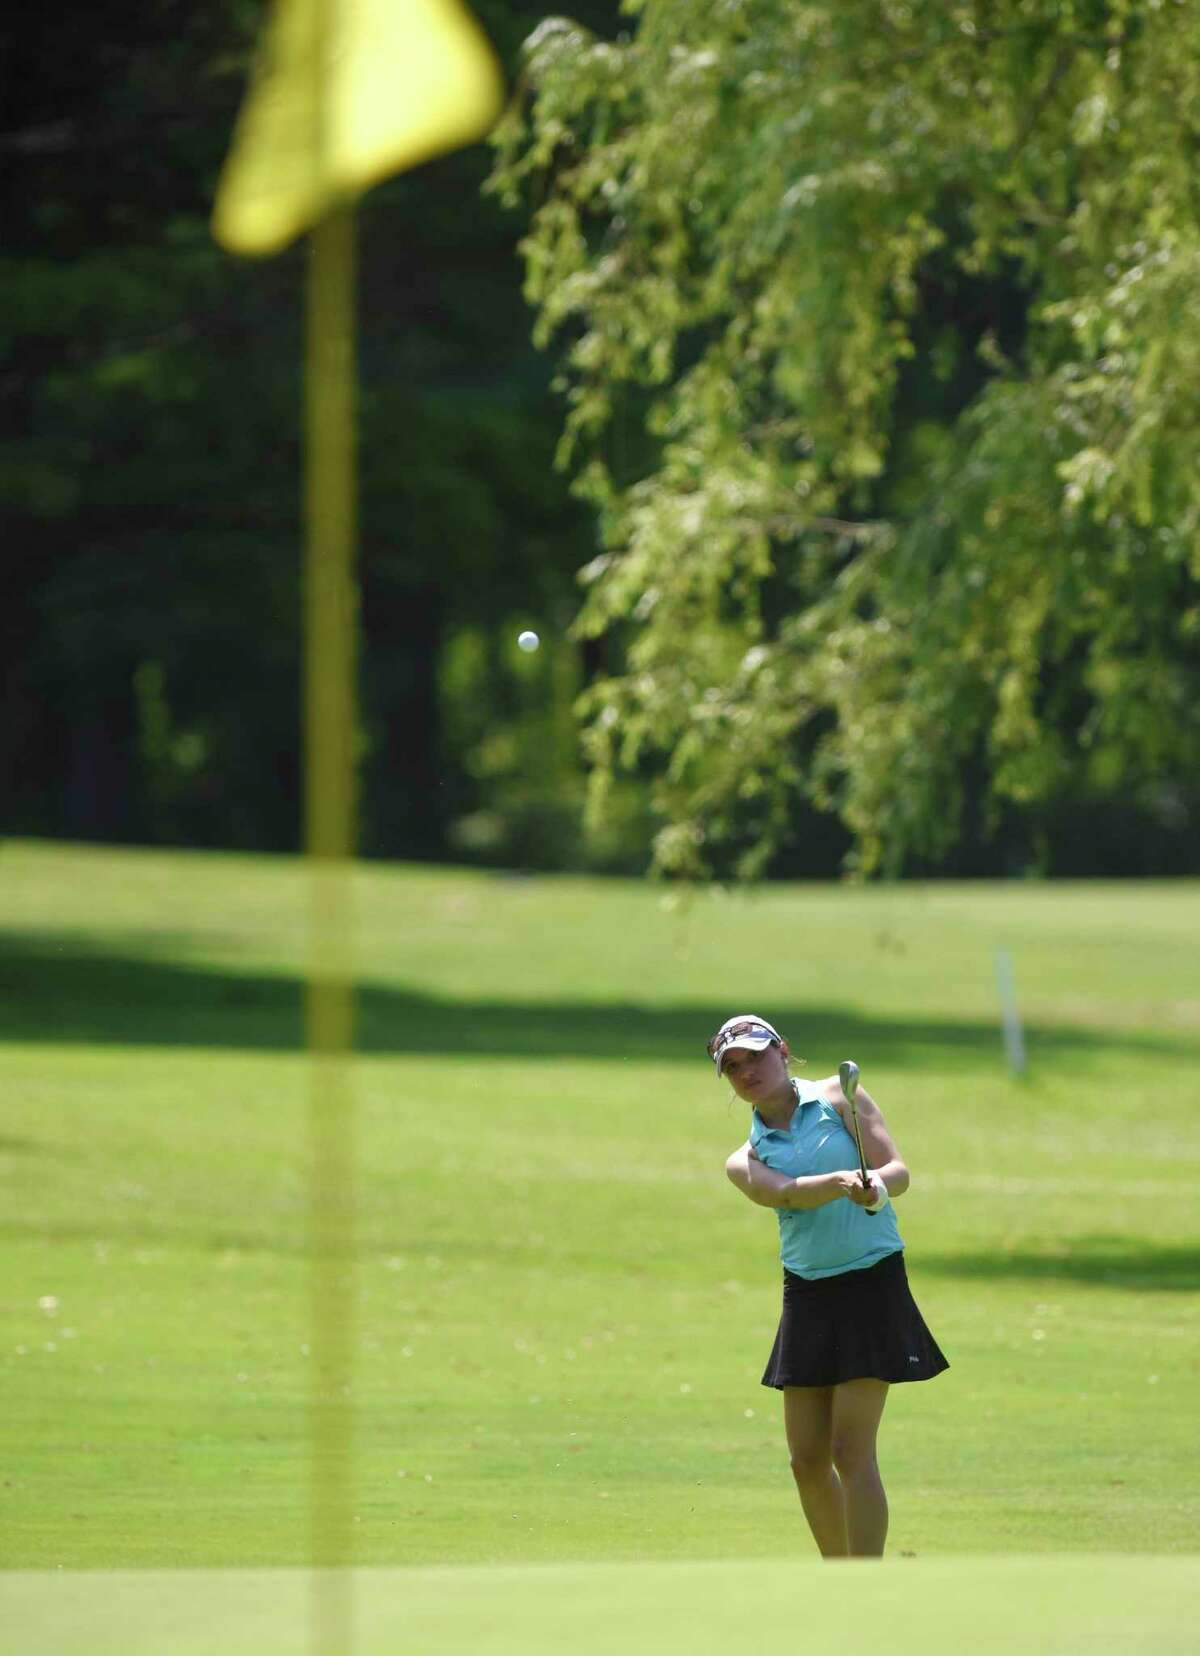 Kendyl Nethercott plays in the Town Wide Women's Golf Tournament at Griffith E. Harris Golf Course in Greenwich, Conn. Monday, June 28, 2021.